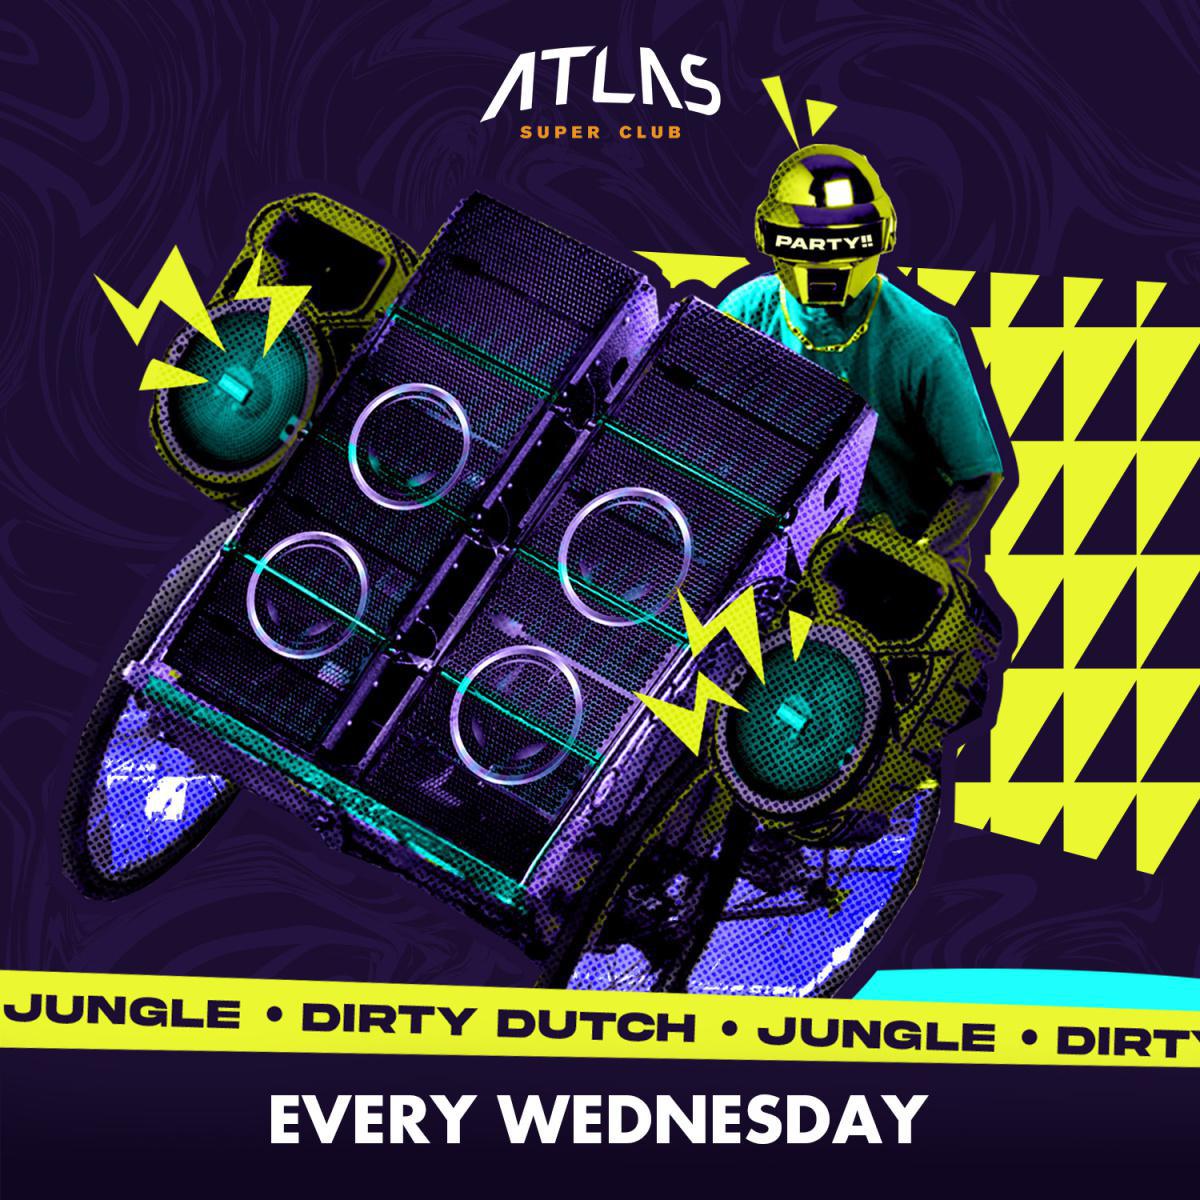 Party Wednesday at Atlas Super Club 2485